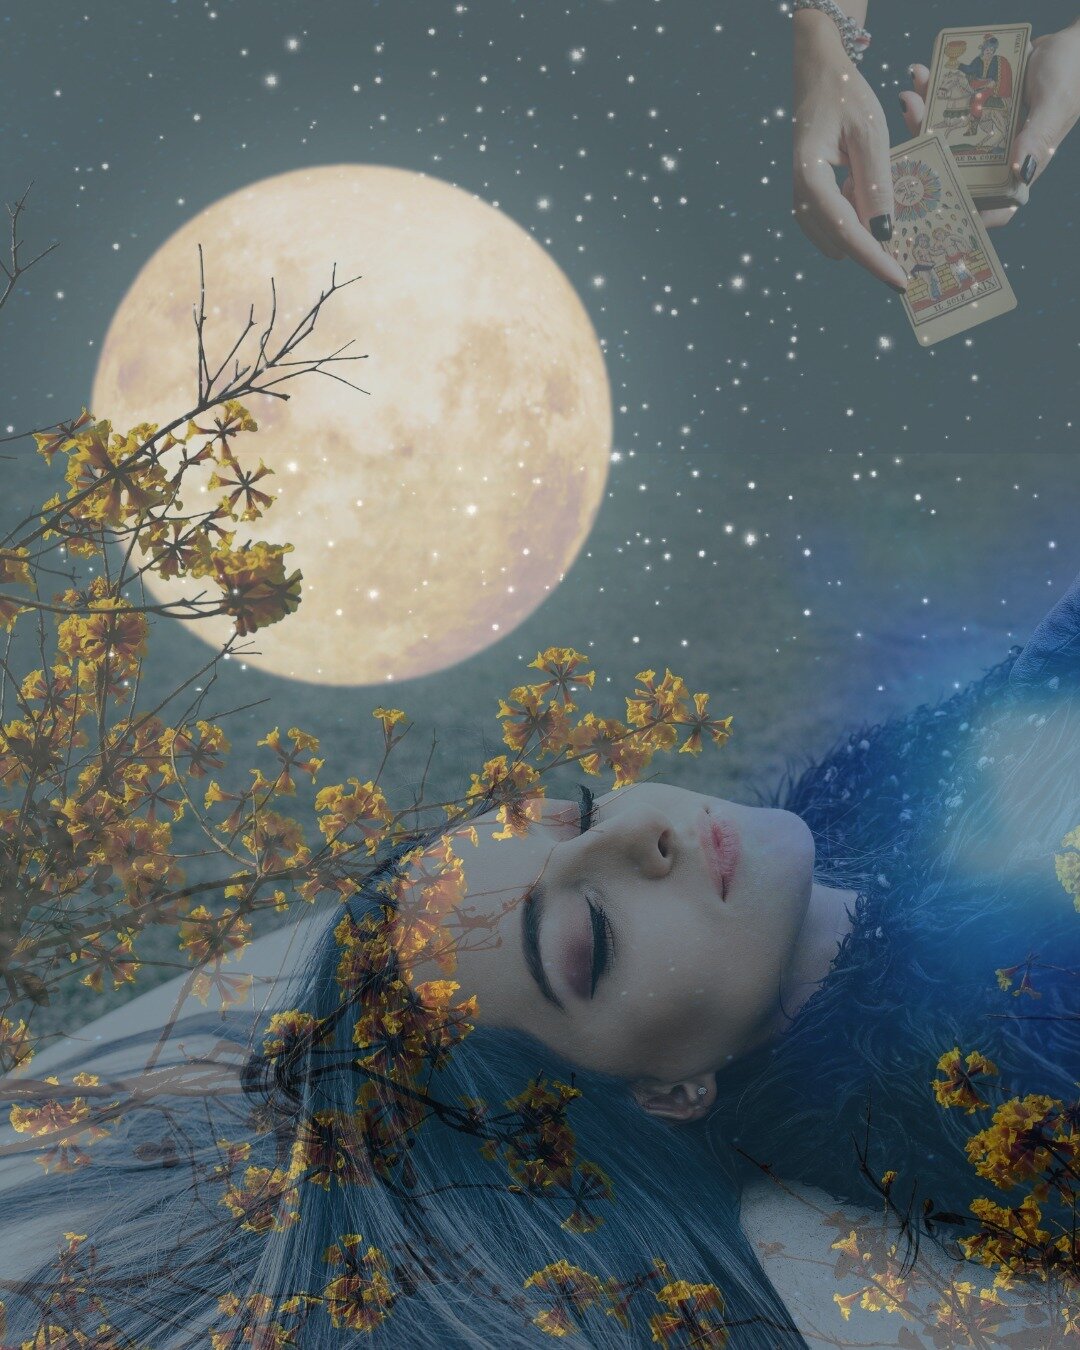 I hope you hear a music in this full moon that
eases your heart open 
and brings you into harmony
with what you love about this life

#fullmoon #lunareclipse #digitalcollage